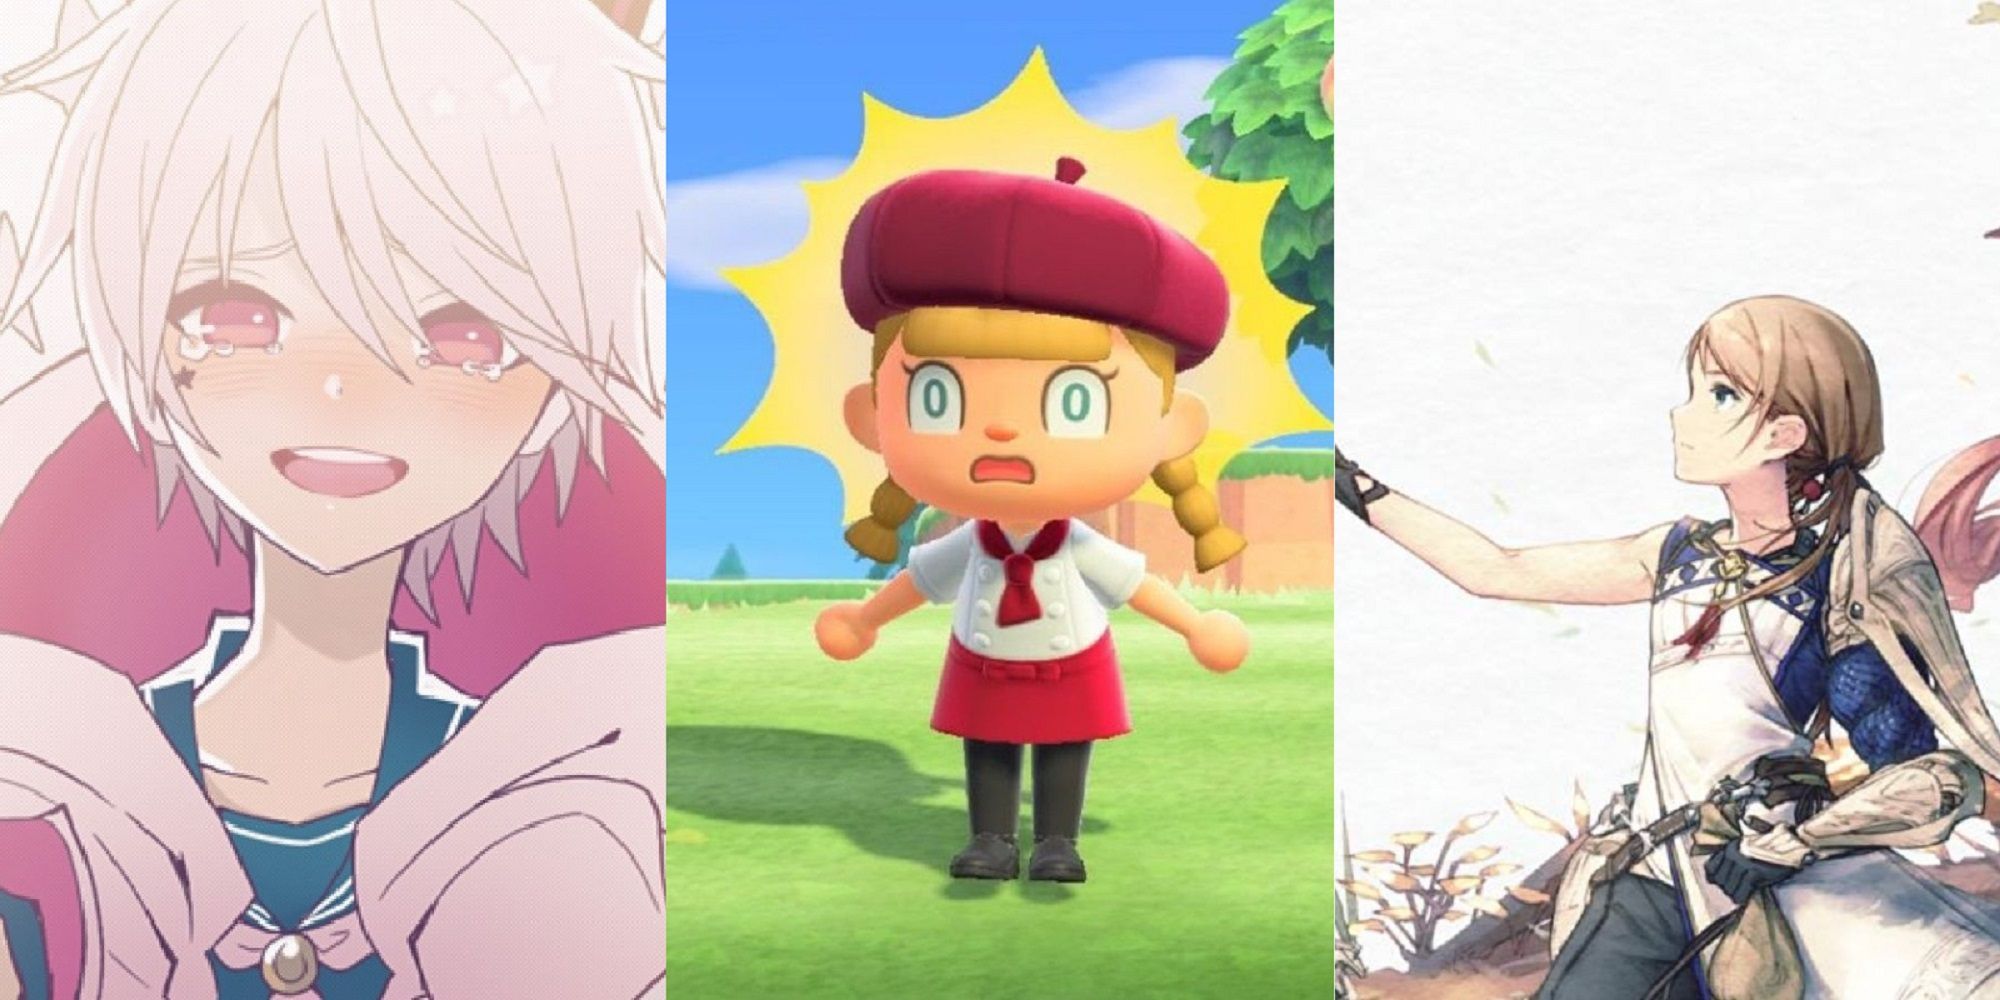 Split image of Nanashi at the end of 1bitHeart, a shocked villager from Animal Crossing New Horizons, and the official artwork of Harvestella